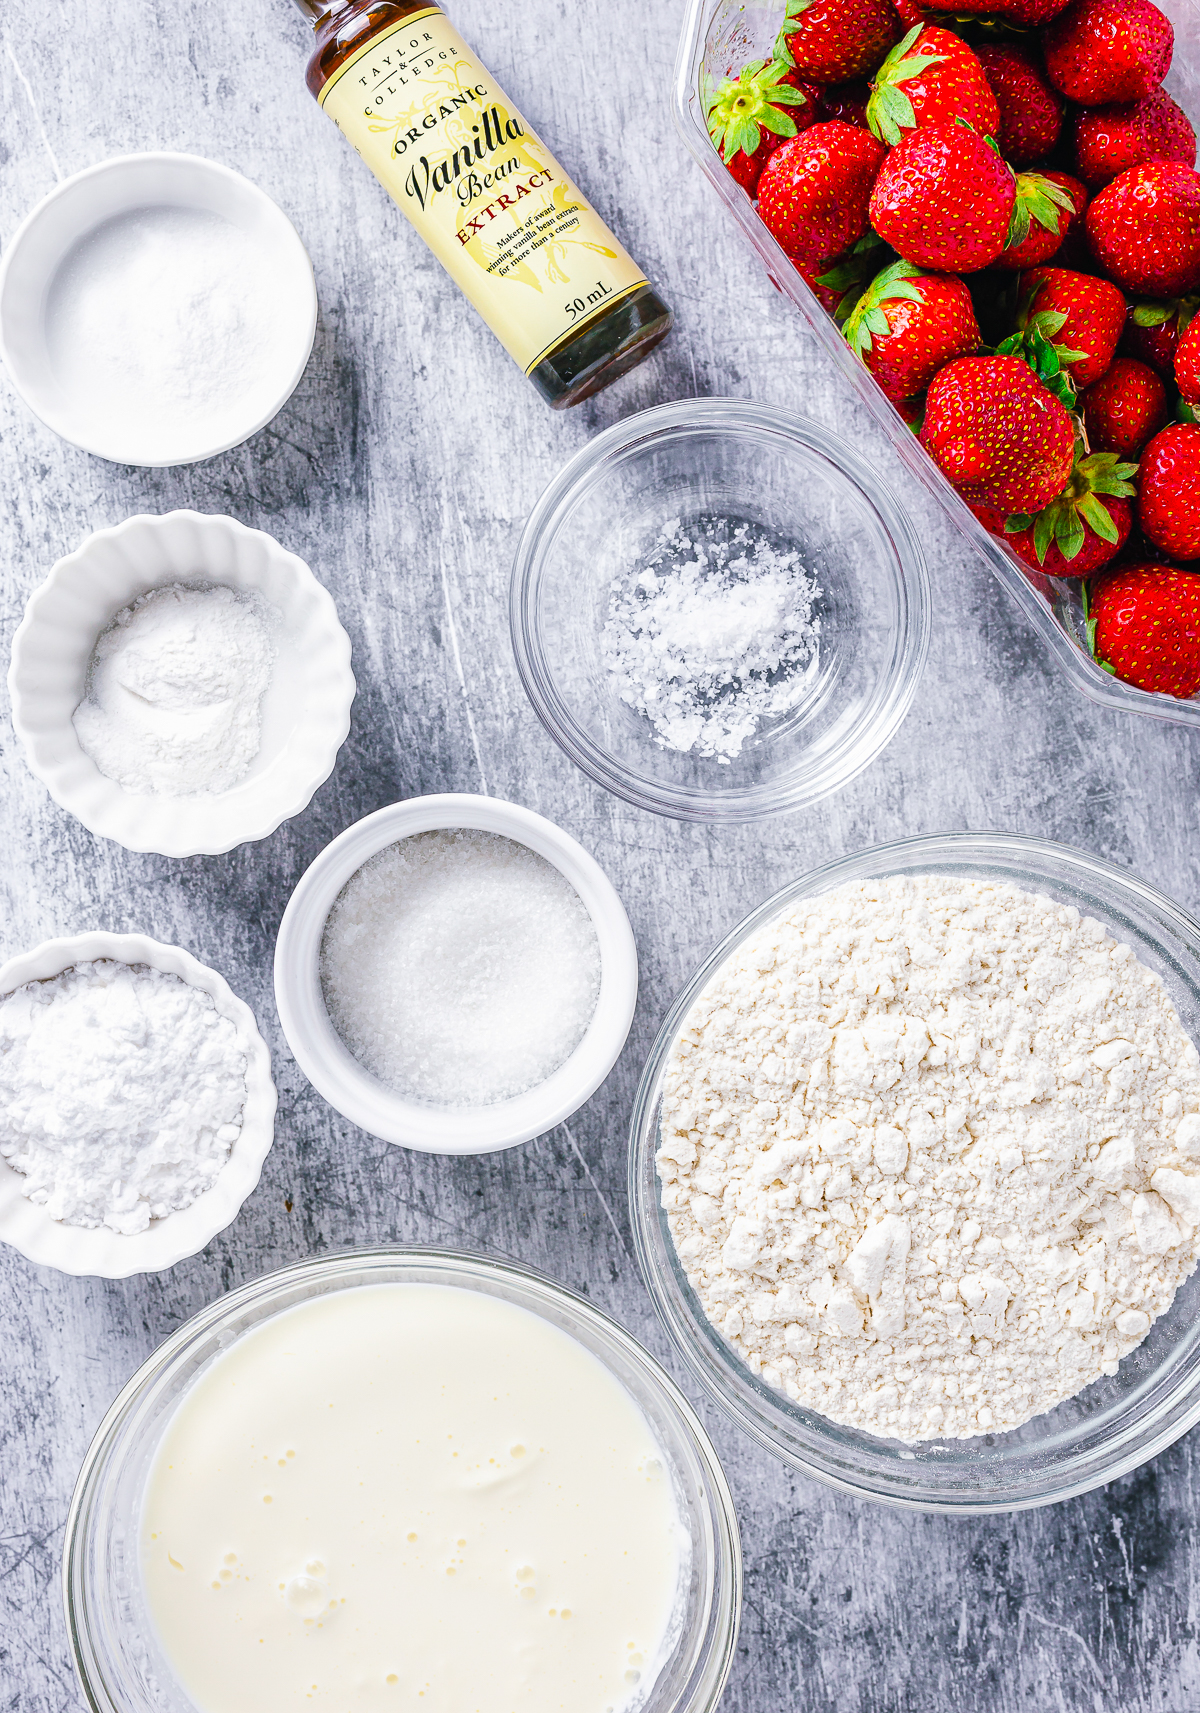 Ingredients needed to make a Strawberry Shortcake Recipe